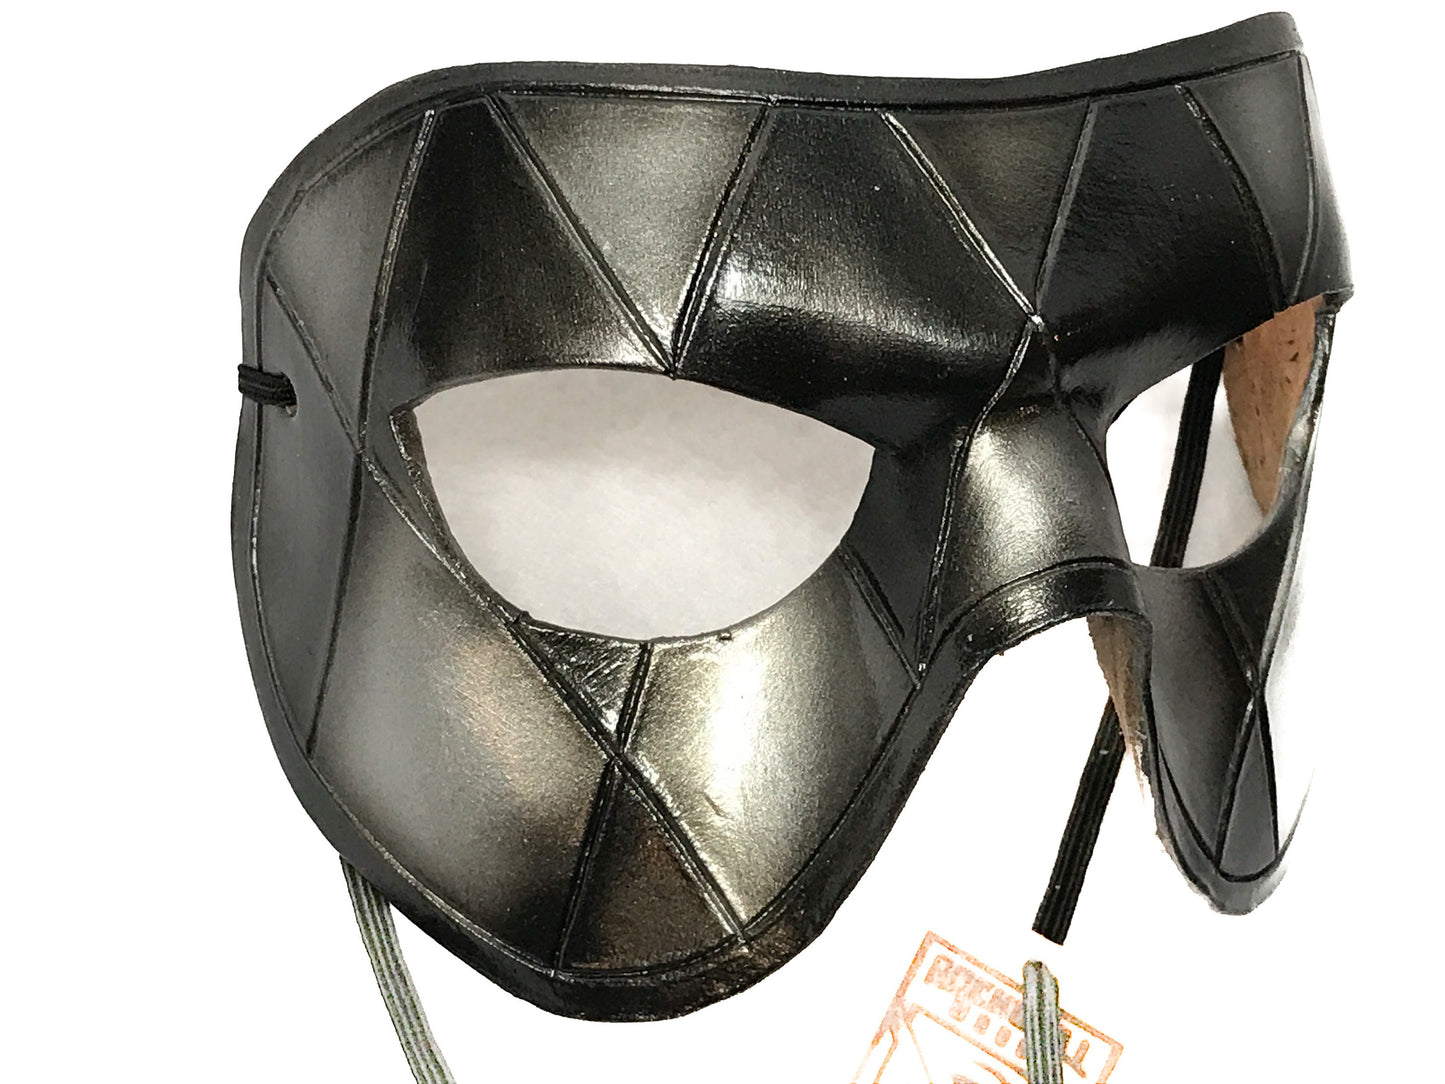 Silver Harlequin Handmade Genuine Leather Mask in Black and Silver